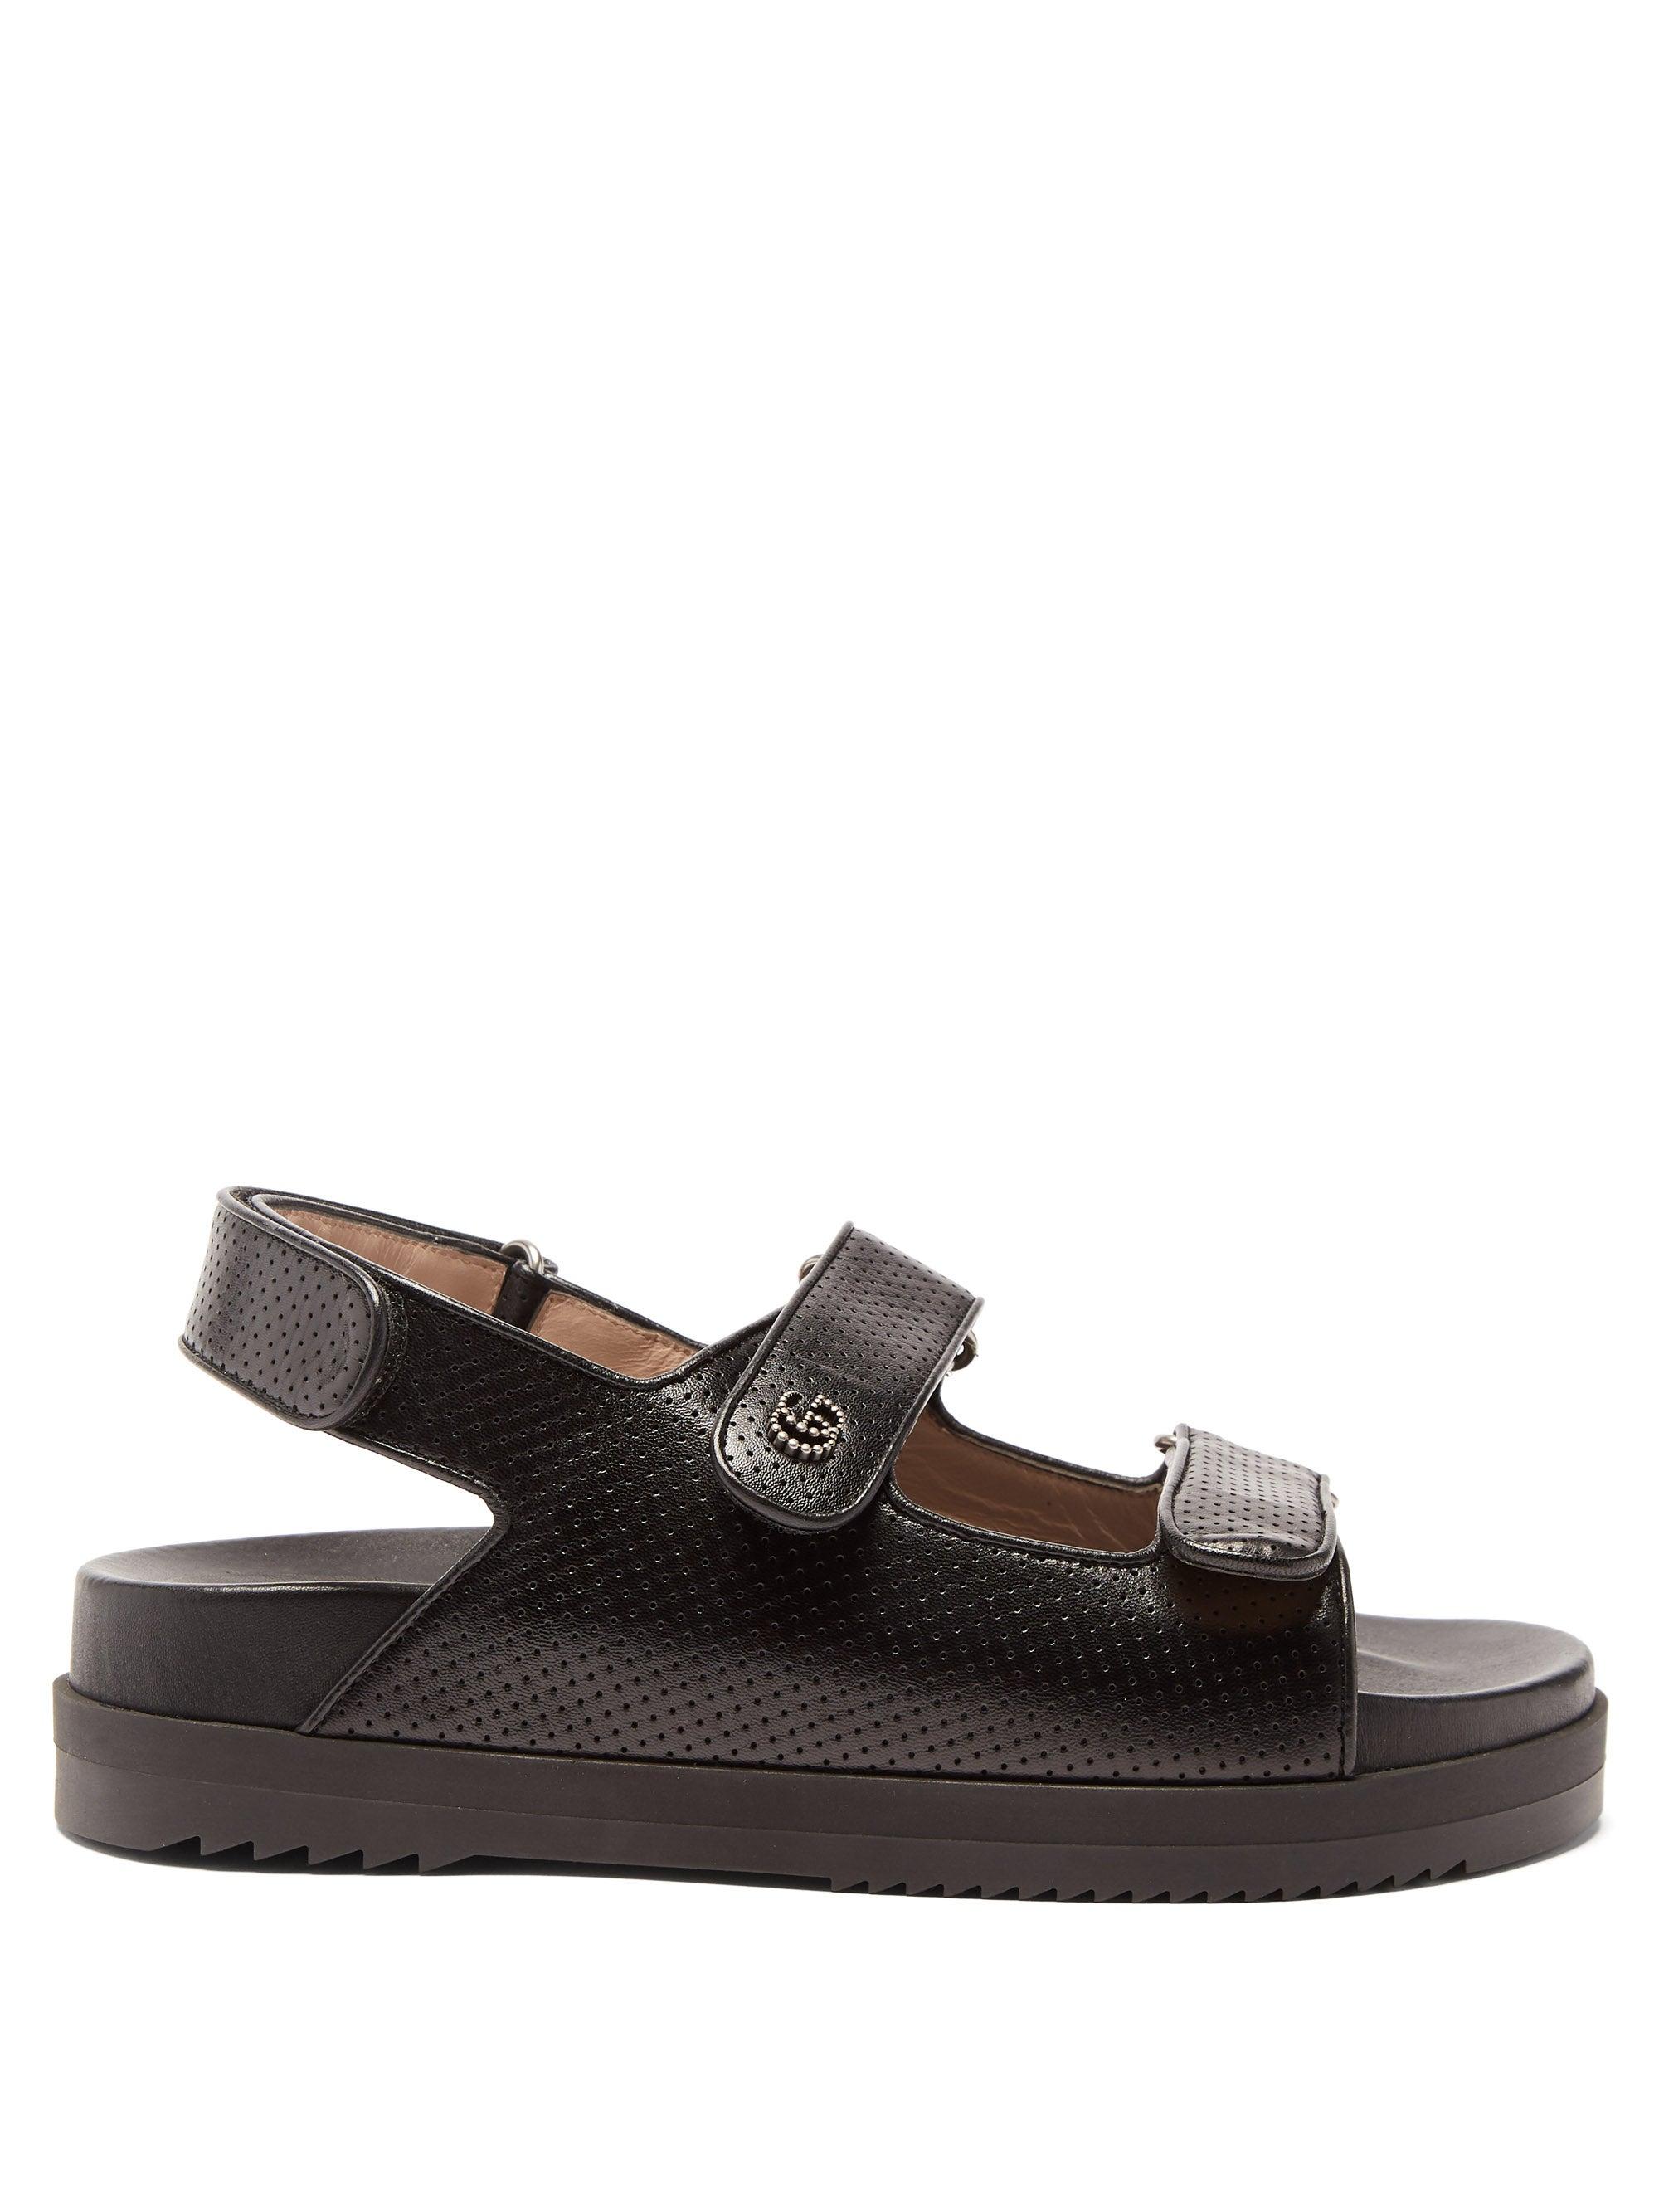 Gucci GG Buckled Perforated-leather Sandals in Black | Lyst